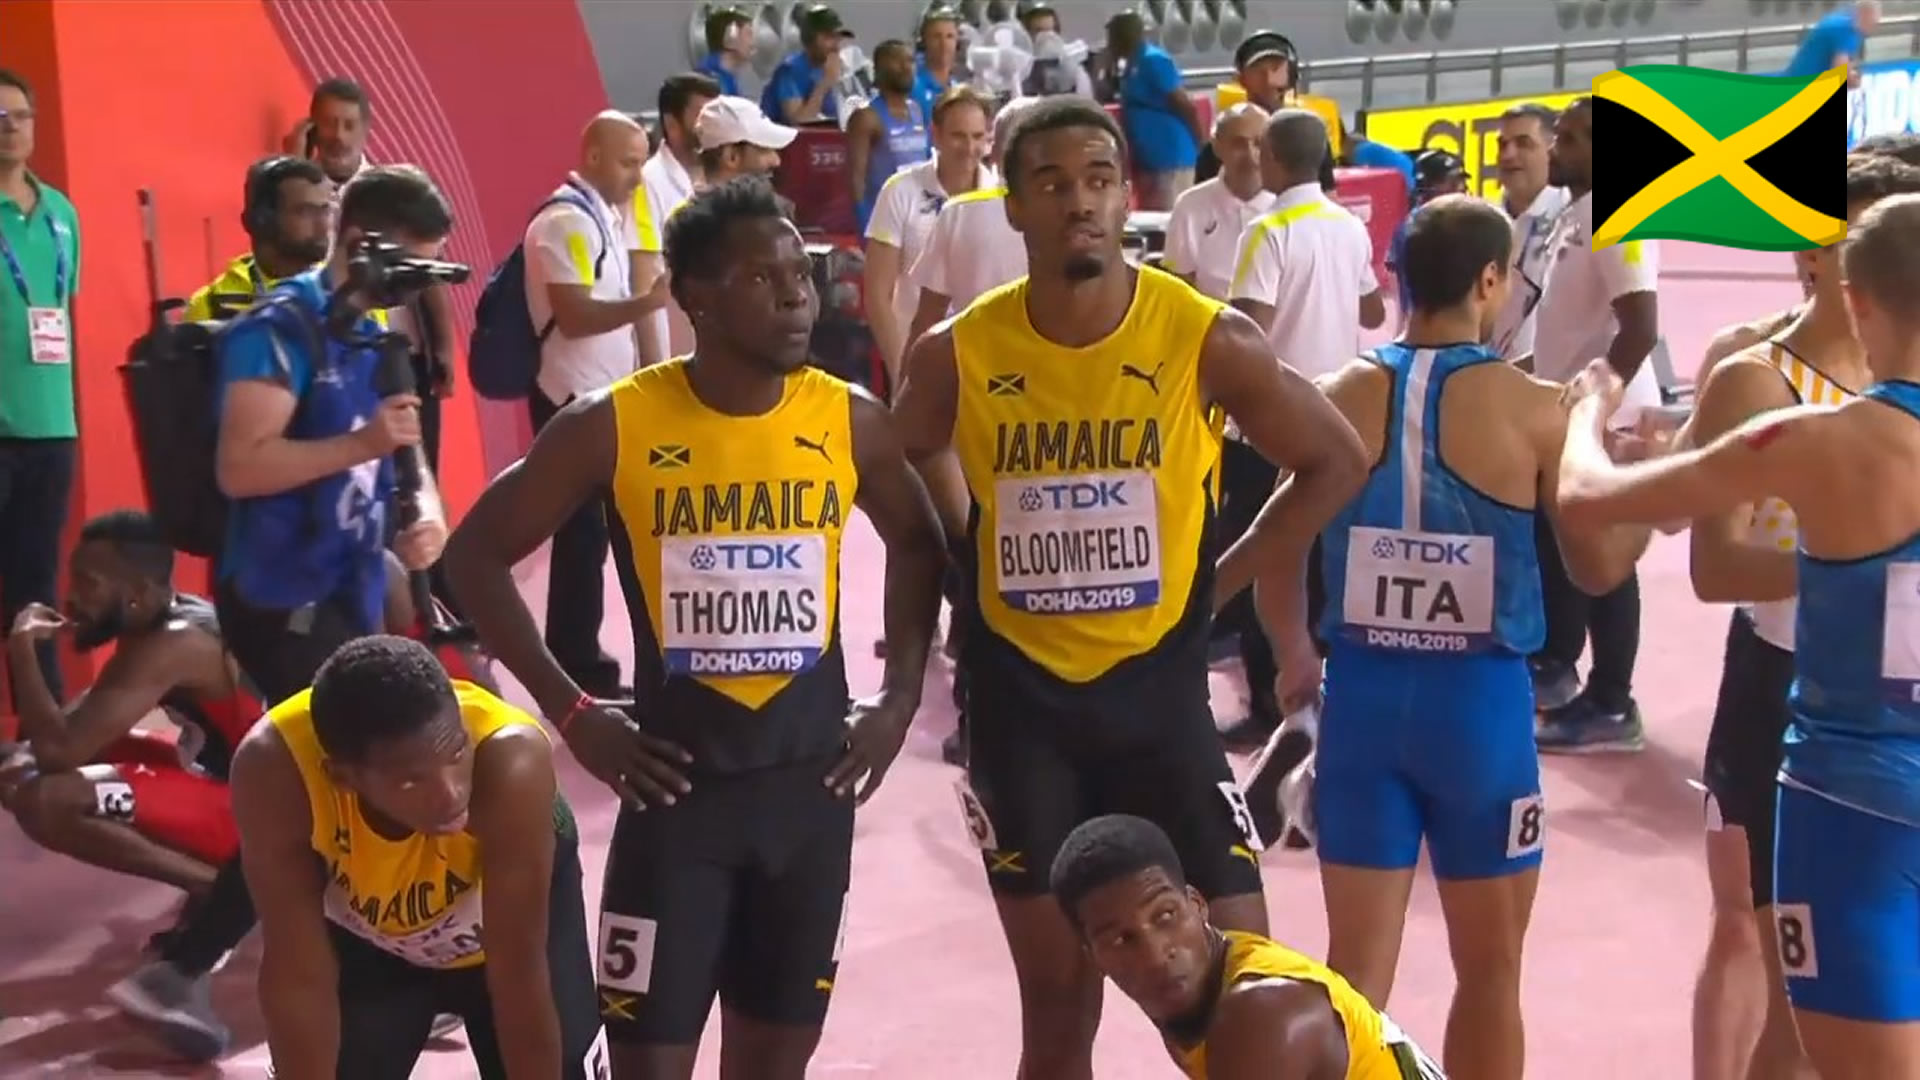 Watch: Team Jamaica Wins Silver in Men's 4x400m Relay At World Champs